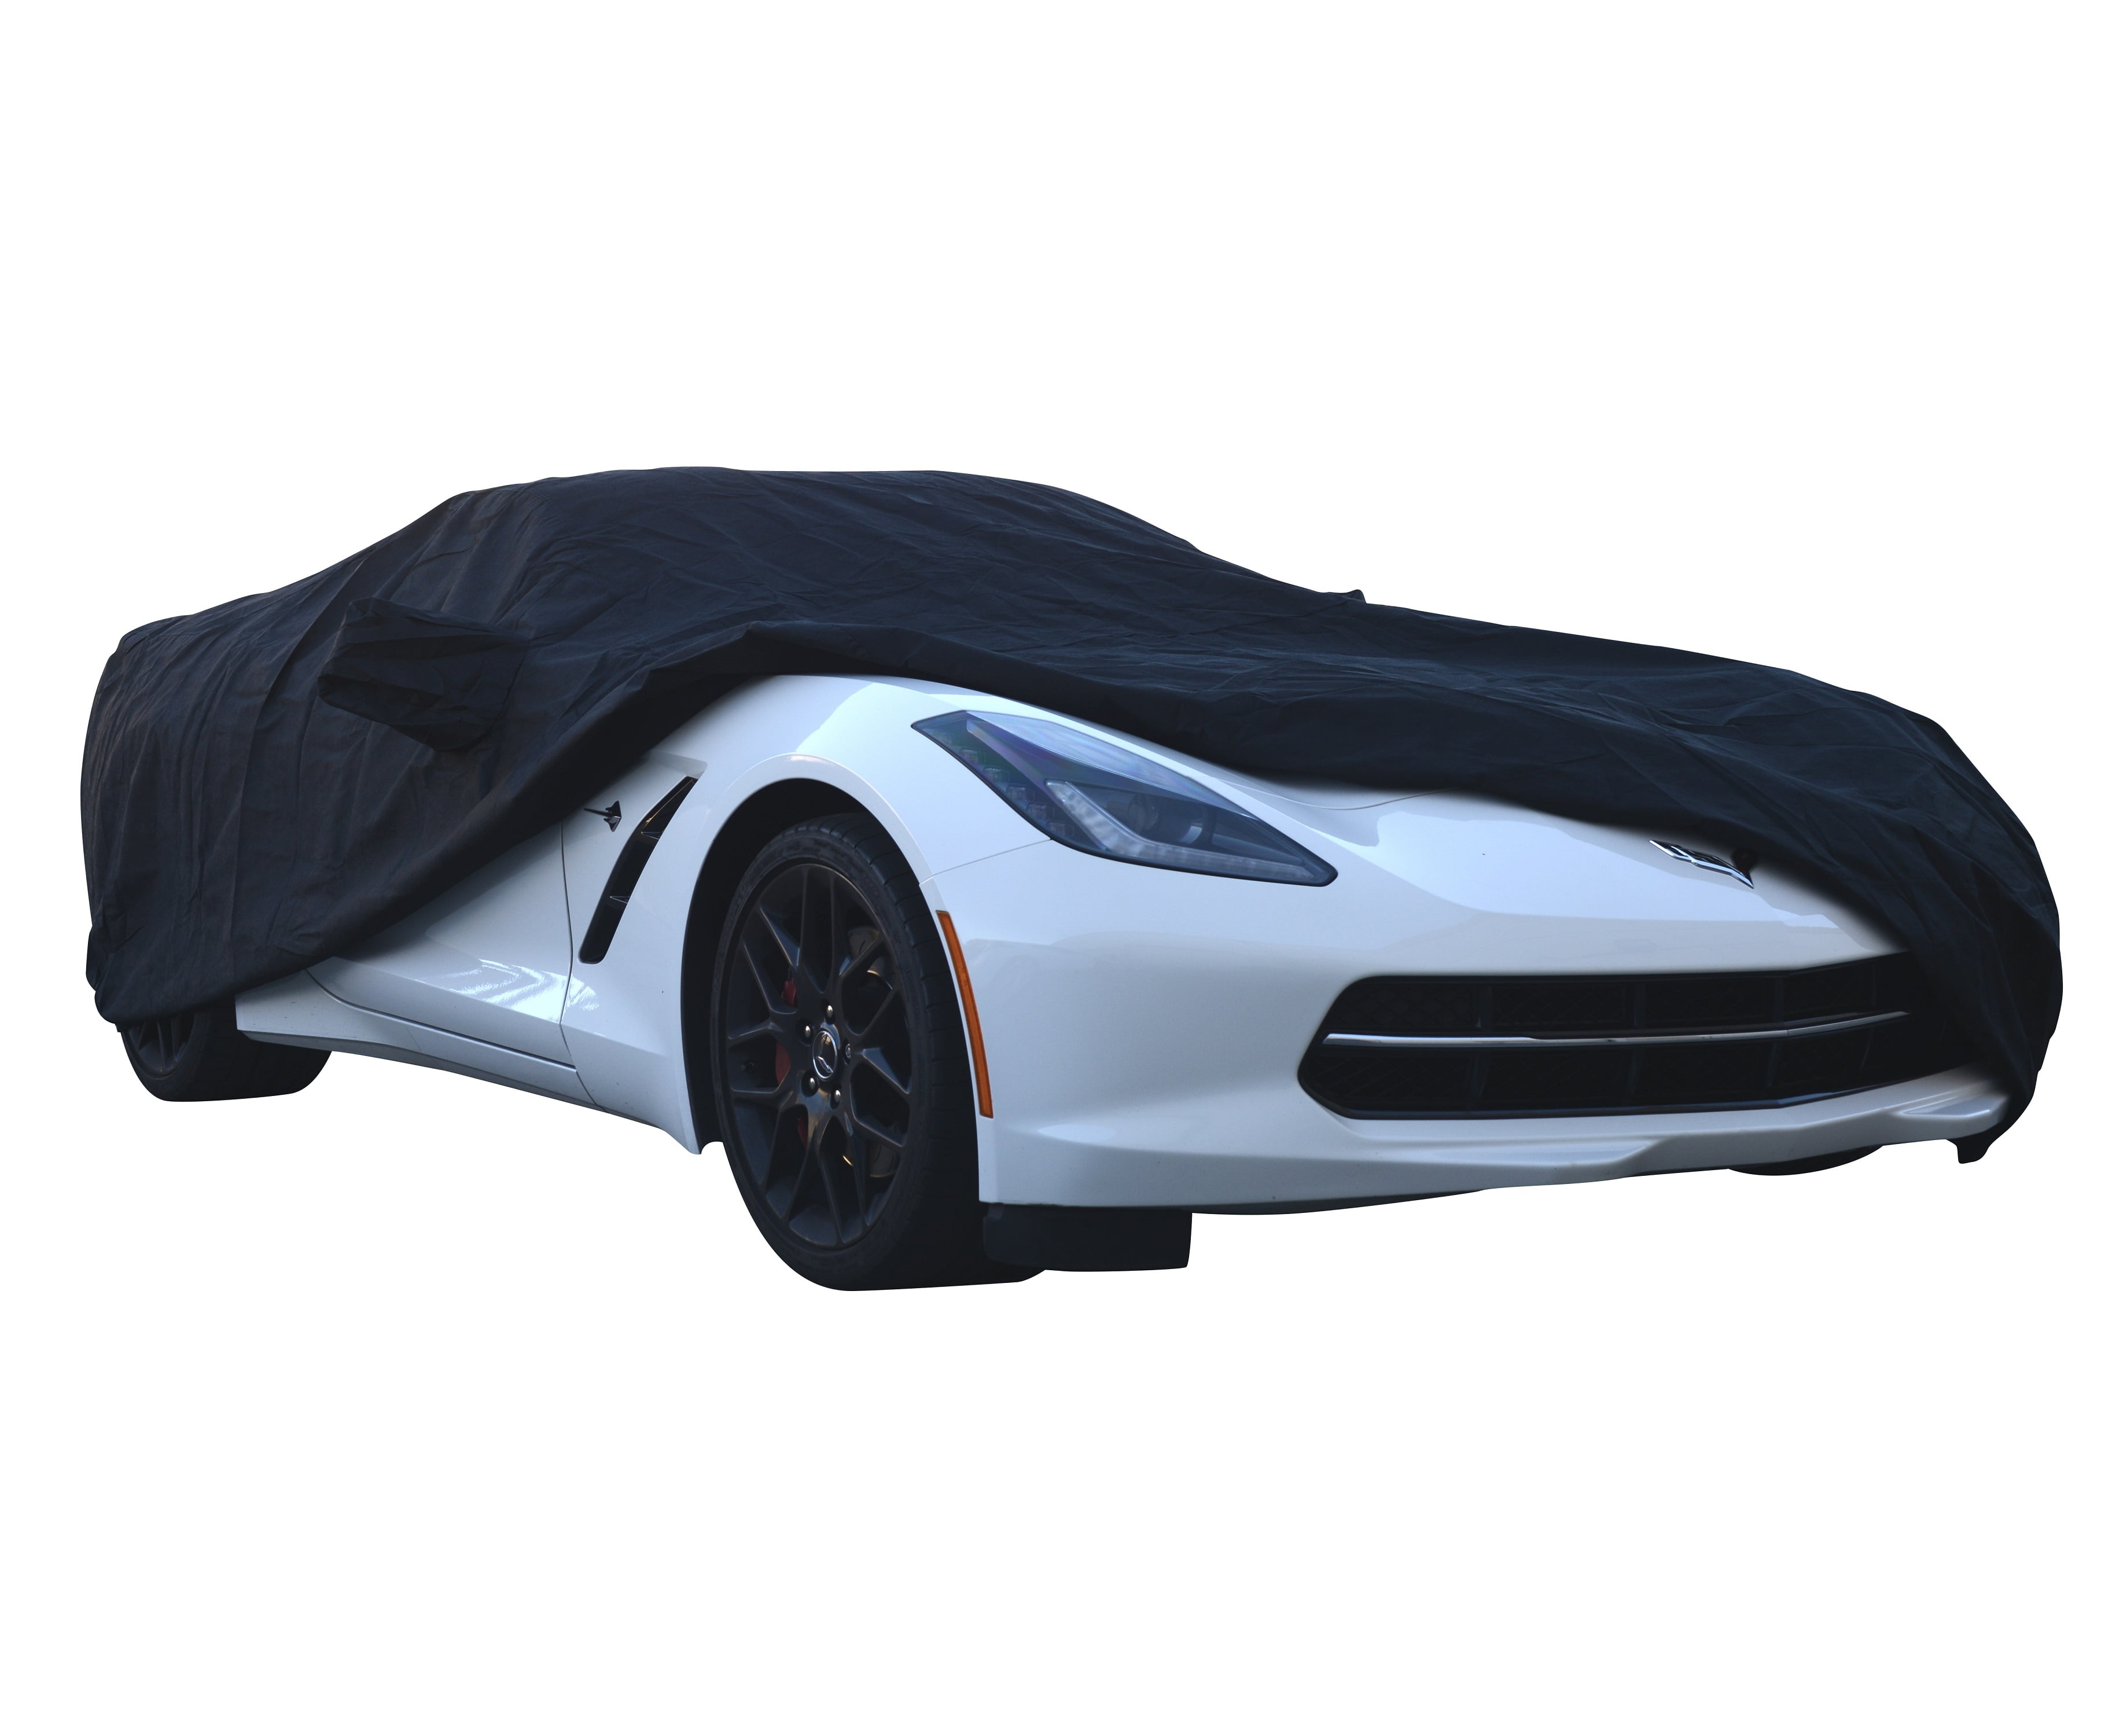 1973 1974 1975 1976 1977 1978 1979 Waterproof Custom-Fit Car Cover iCarCover Fits. Chevy Corvette